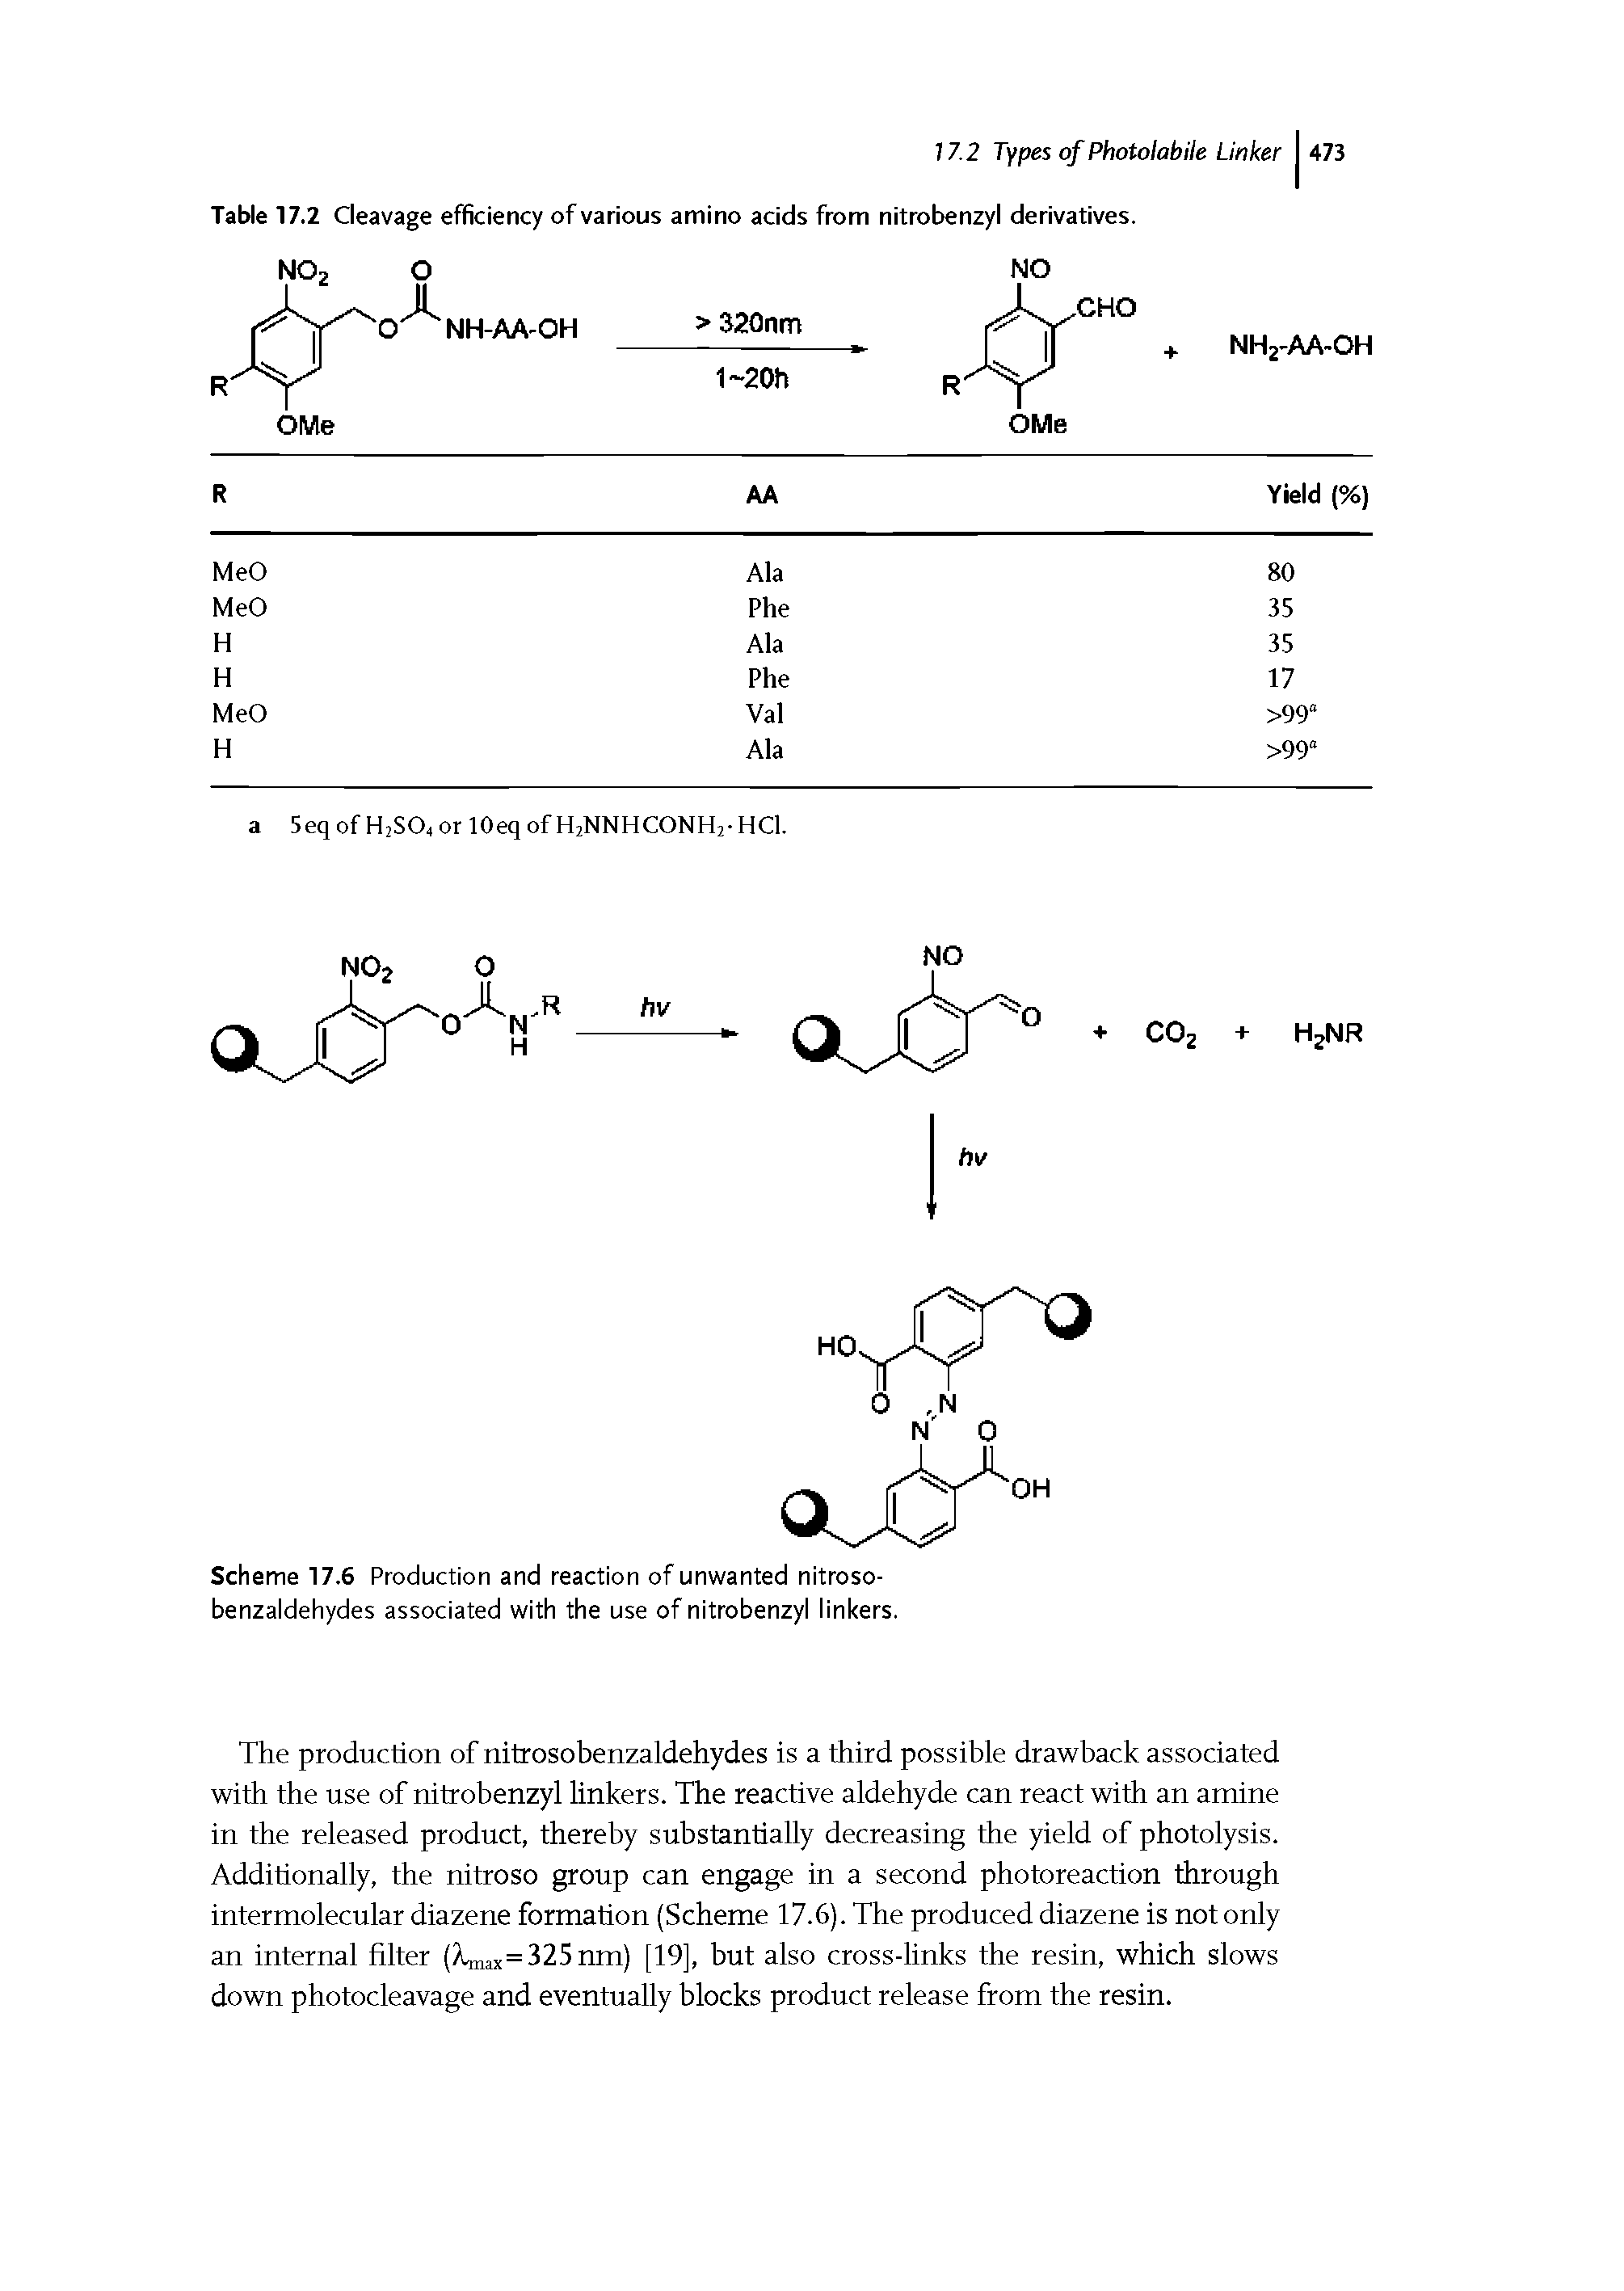 Table 17.2 Cleavage efficiency of various amino acids from nitrobenzyl derivatives.